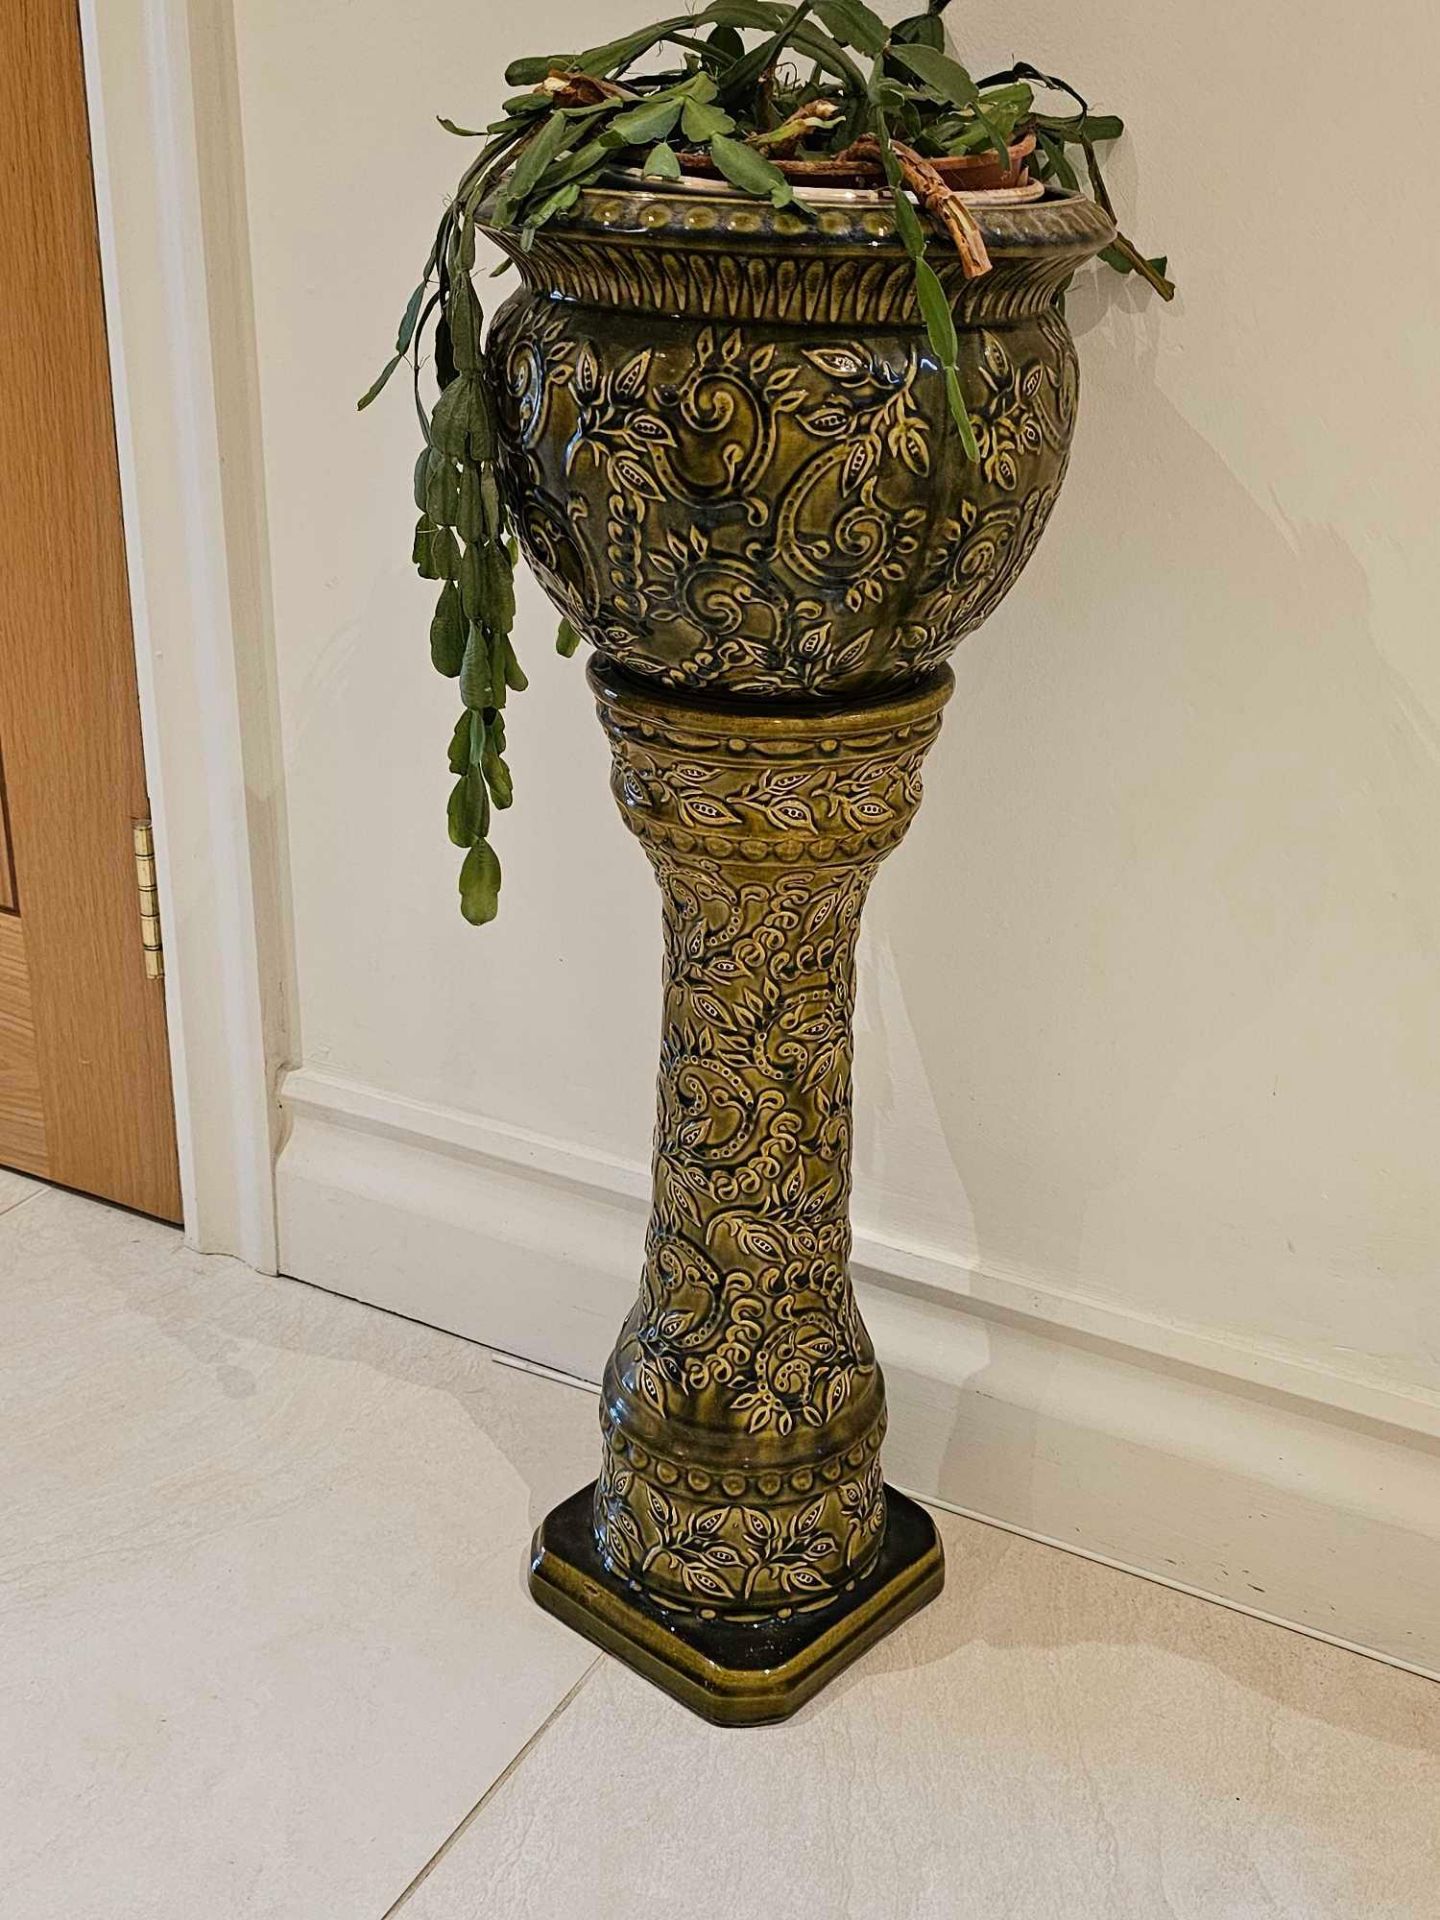 An Edwardian Majolica JardiniÃ¨re And Pedestal Stand Glazed With Foliate Motifs In Relief 28 X 72cm - Image 2 of 3